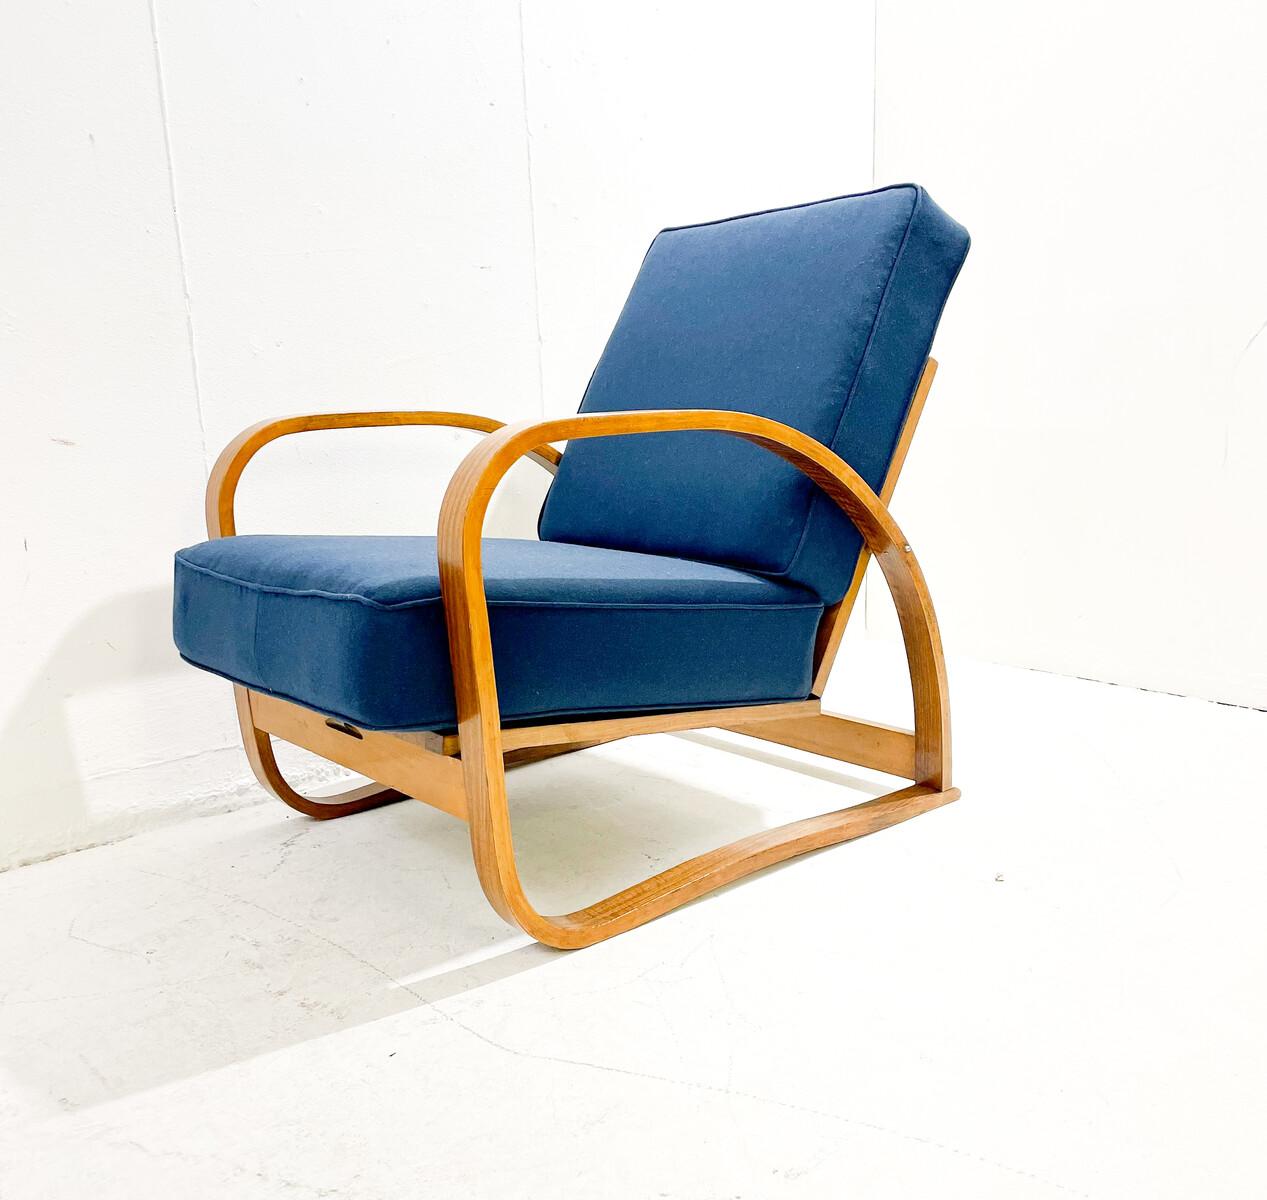 Mid-Century Modern Bentwood Armchair, Jindrich Halabala with Adjustable Back, Czech Republic, 1940s For Sale